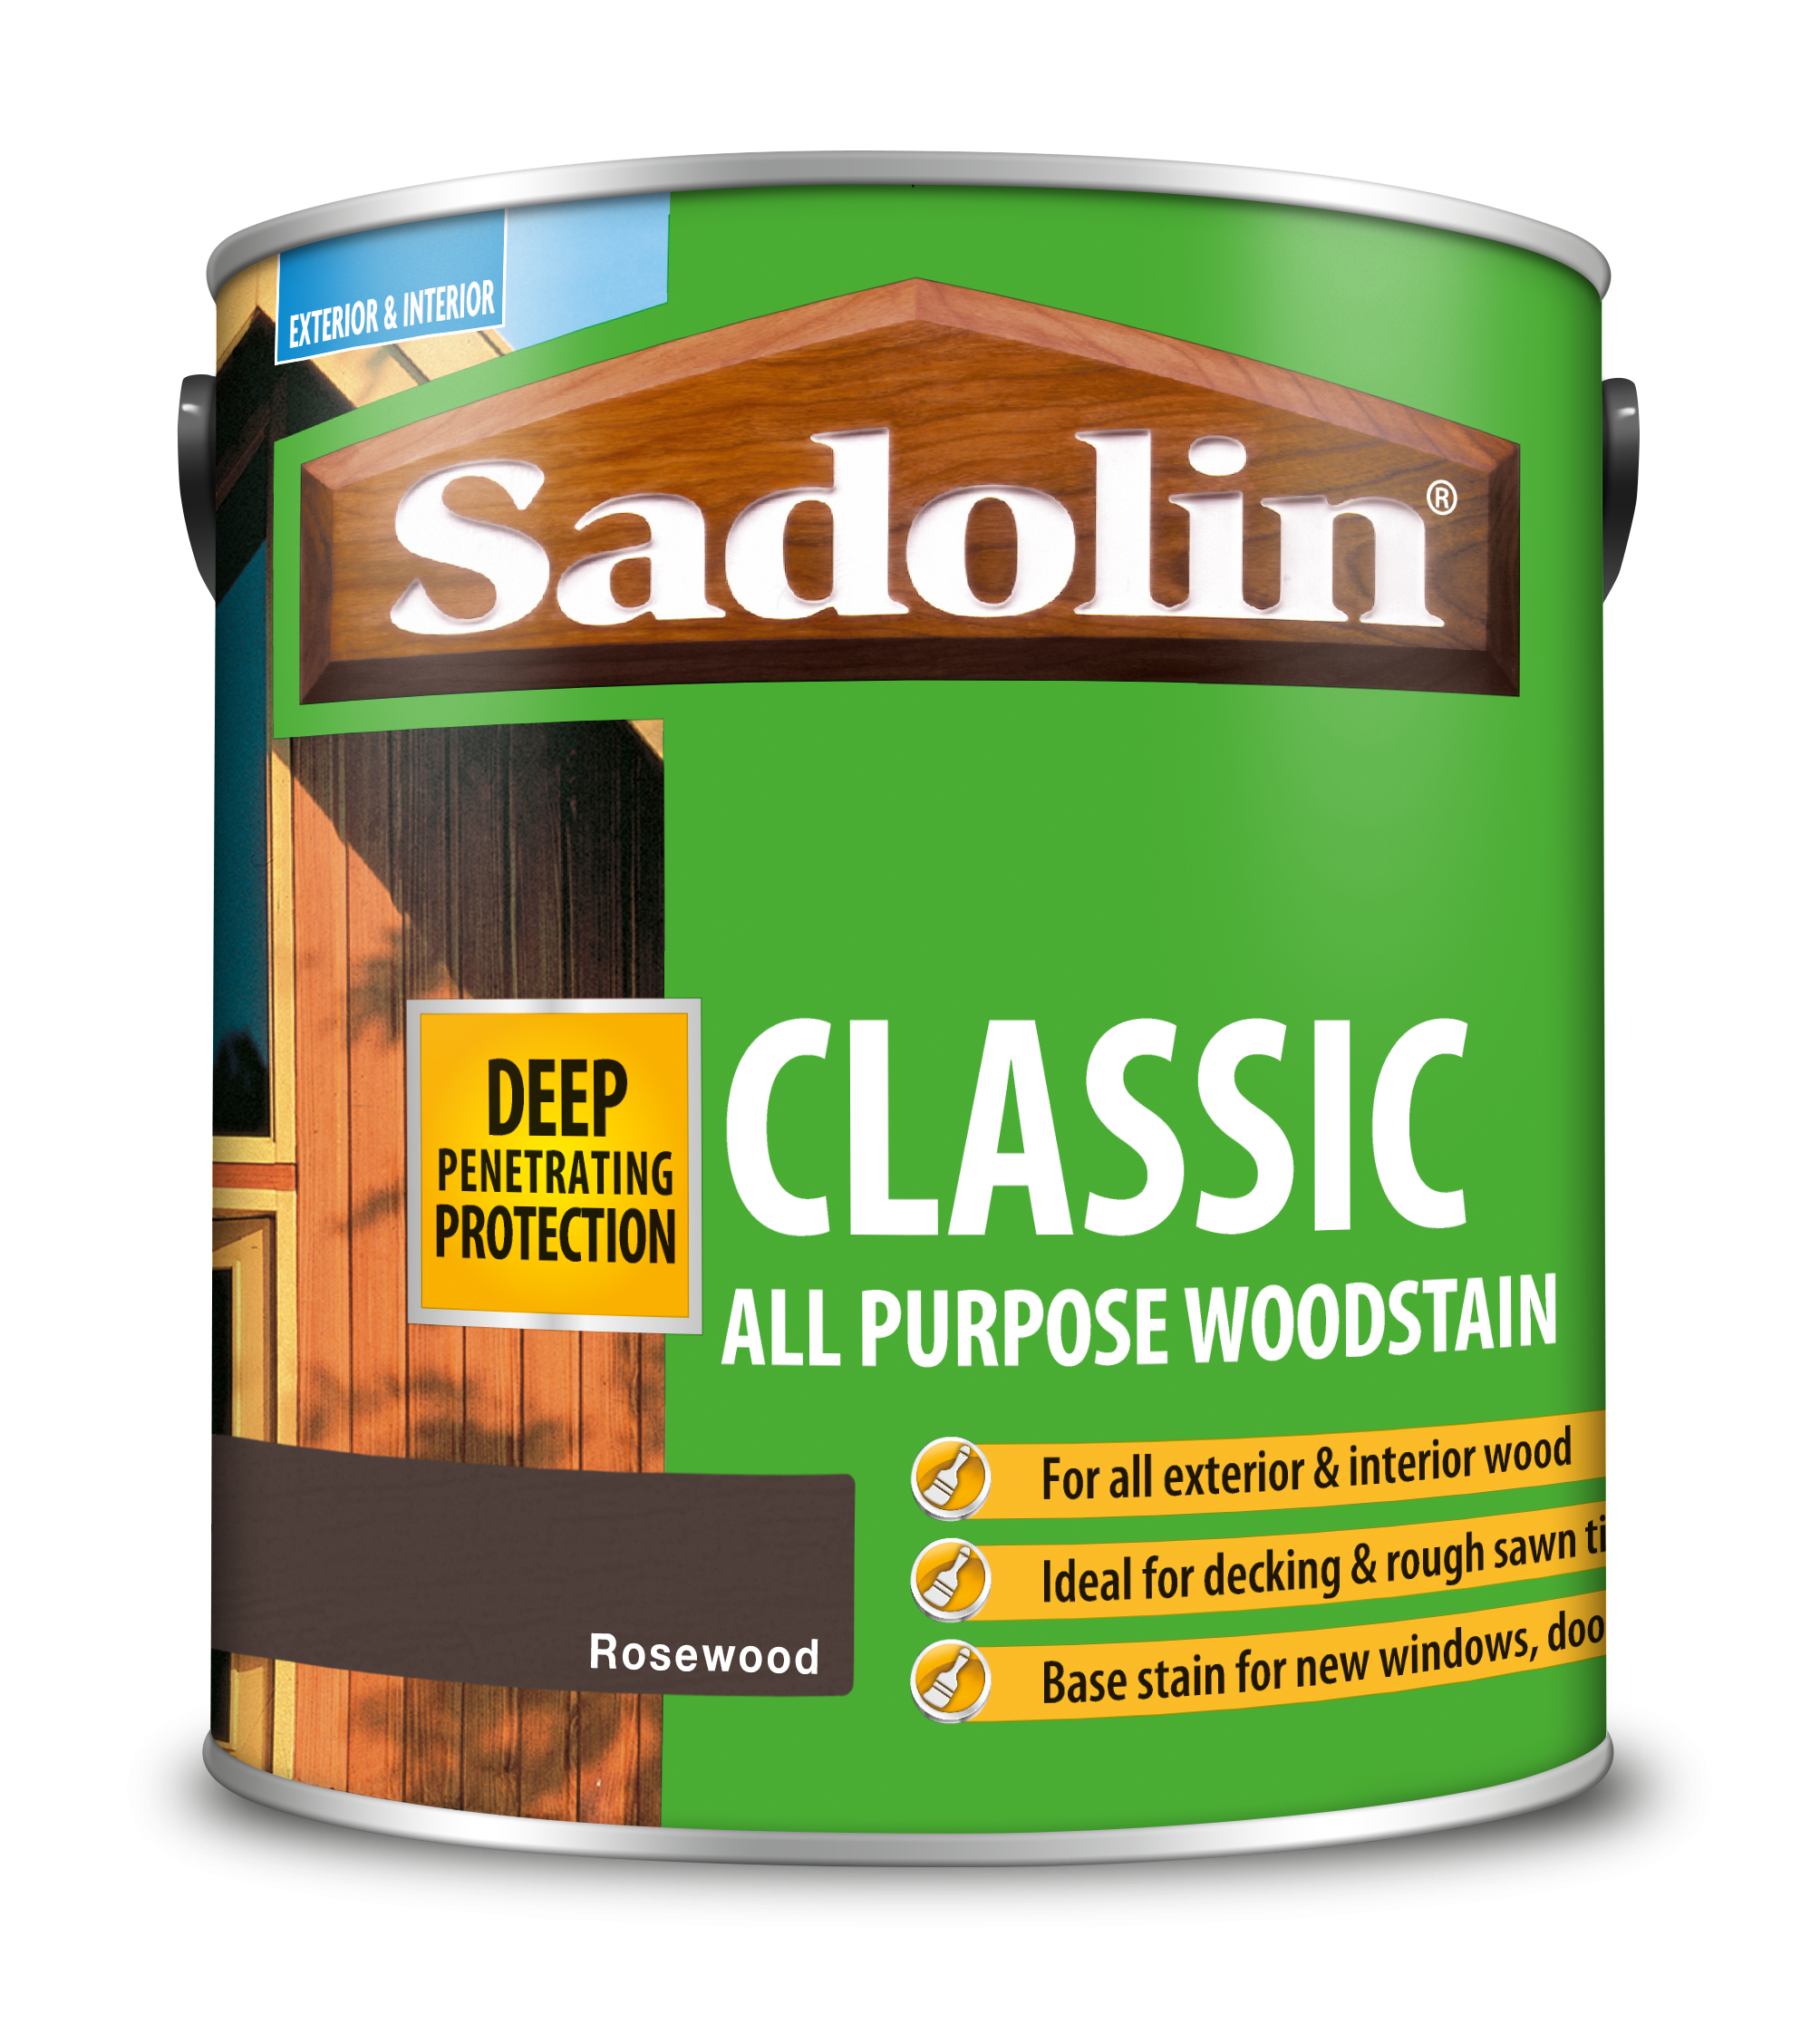 Sadolin Classic All Purpose Woodstain Rosewood 2.5L [MPPSPWK]  5028488